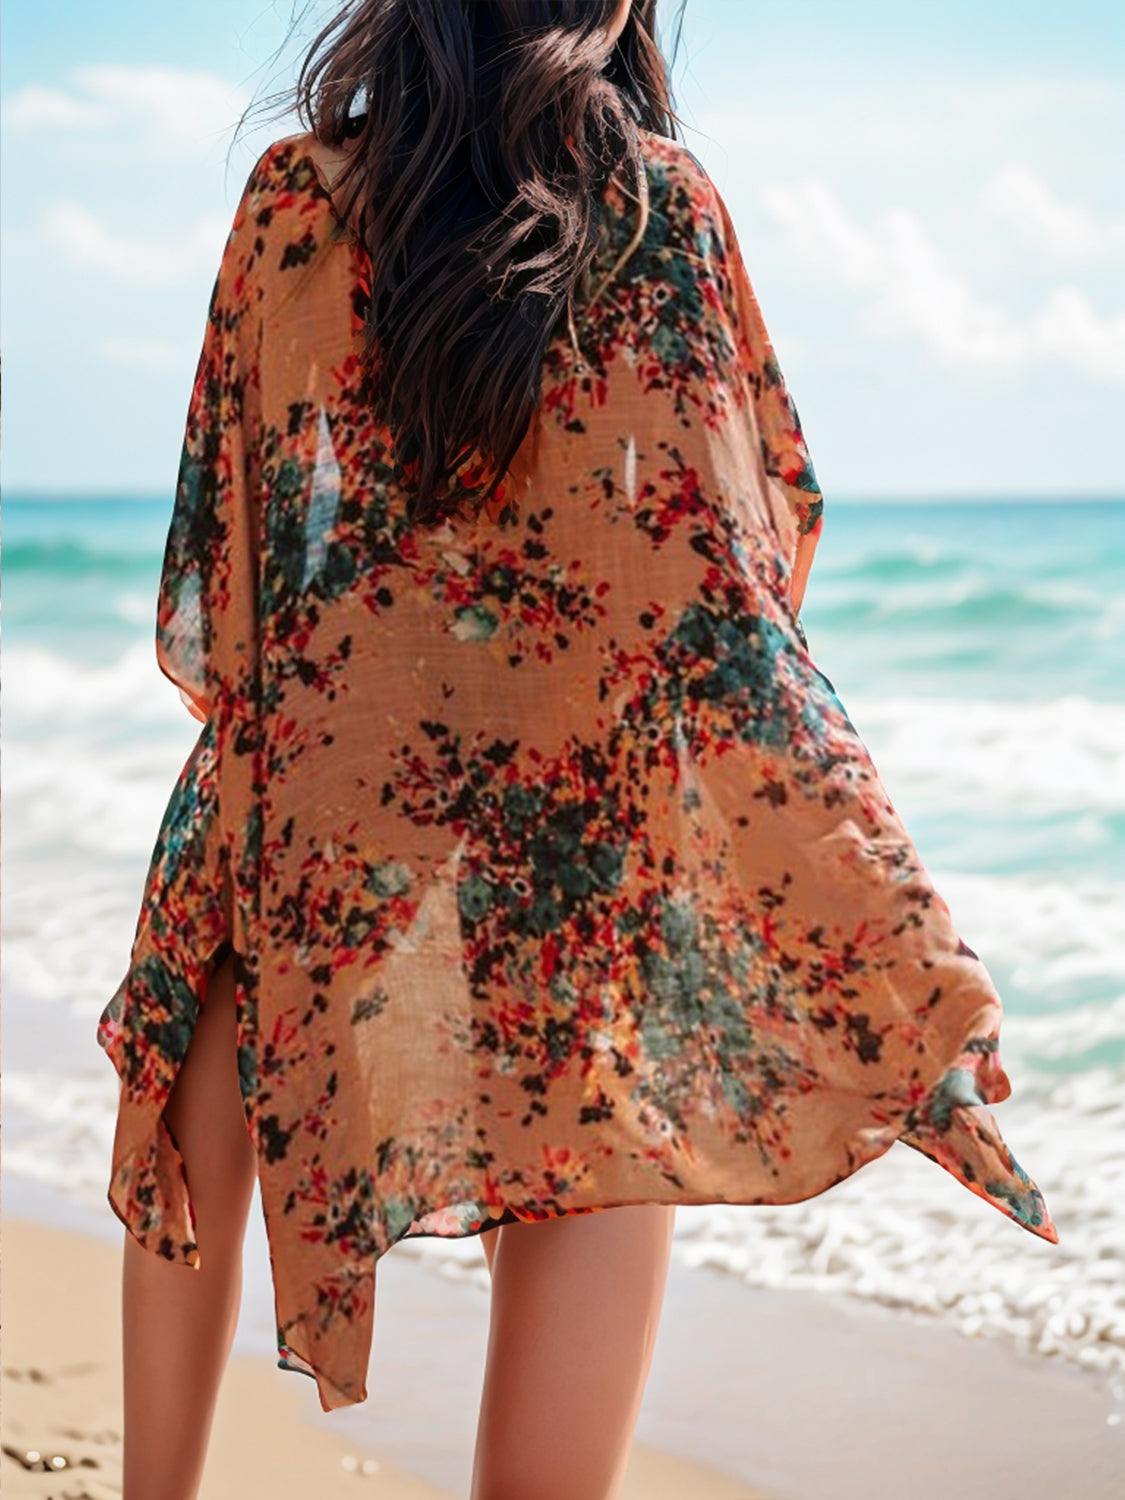 Sunset Vacation  Printed Open Front Cover-Up  Sunset and Swim   